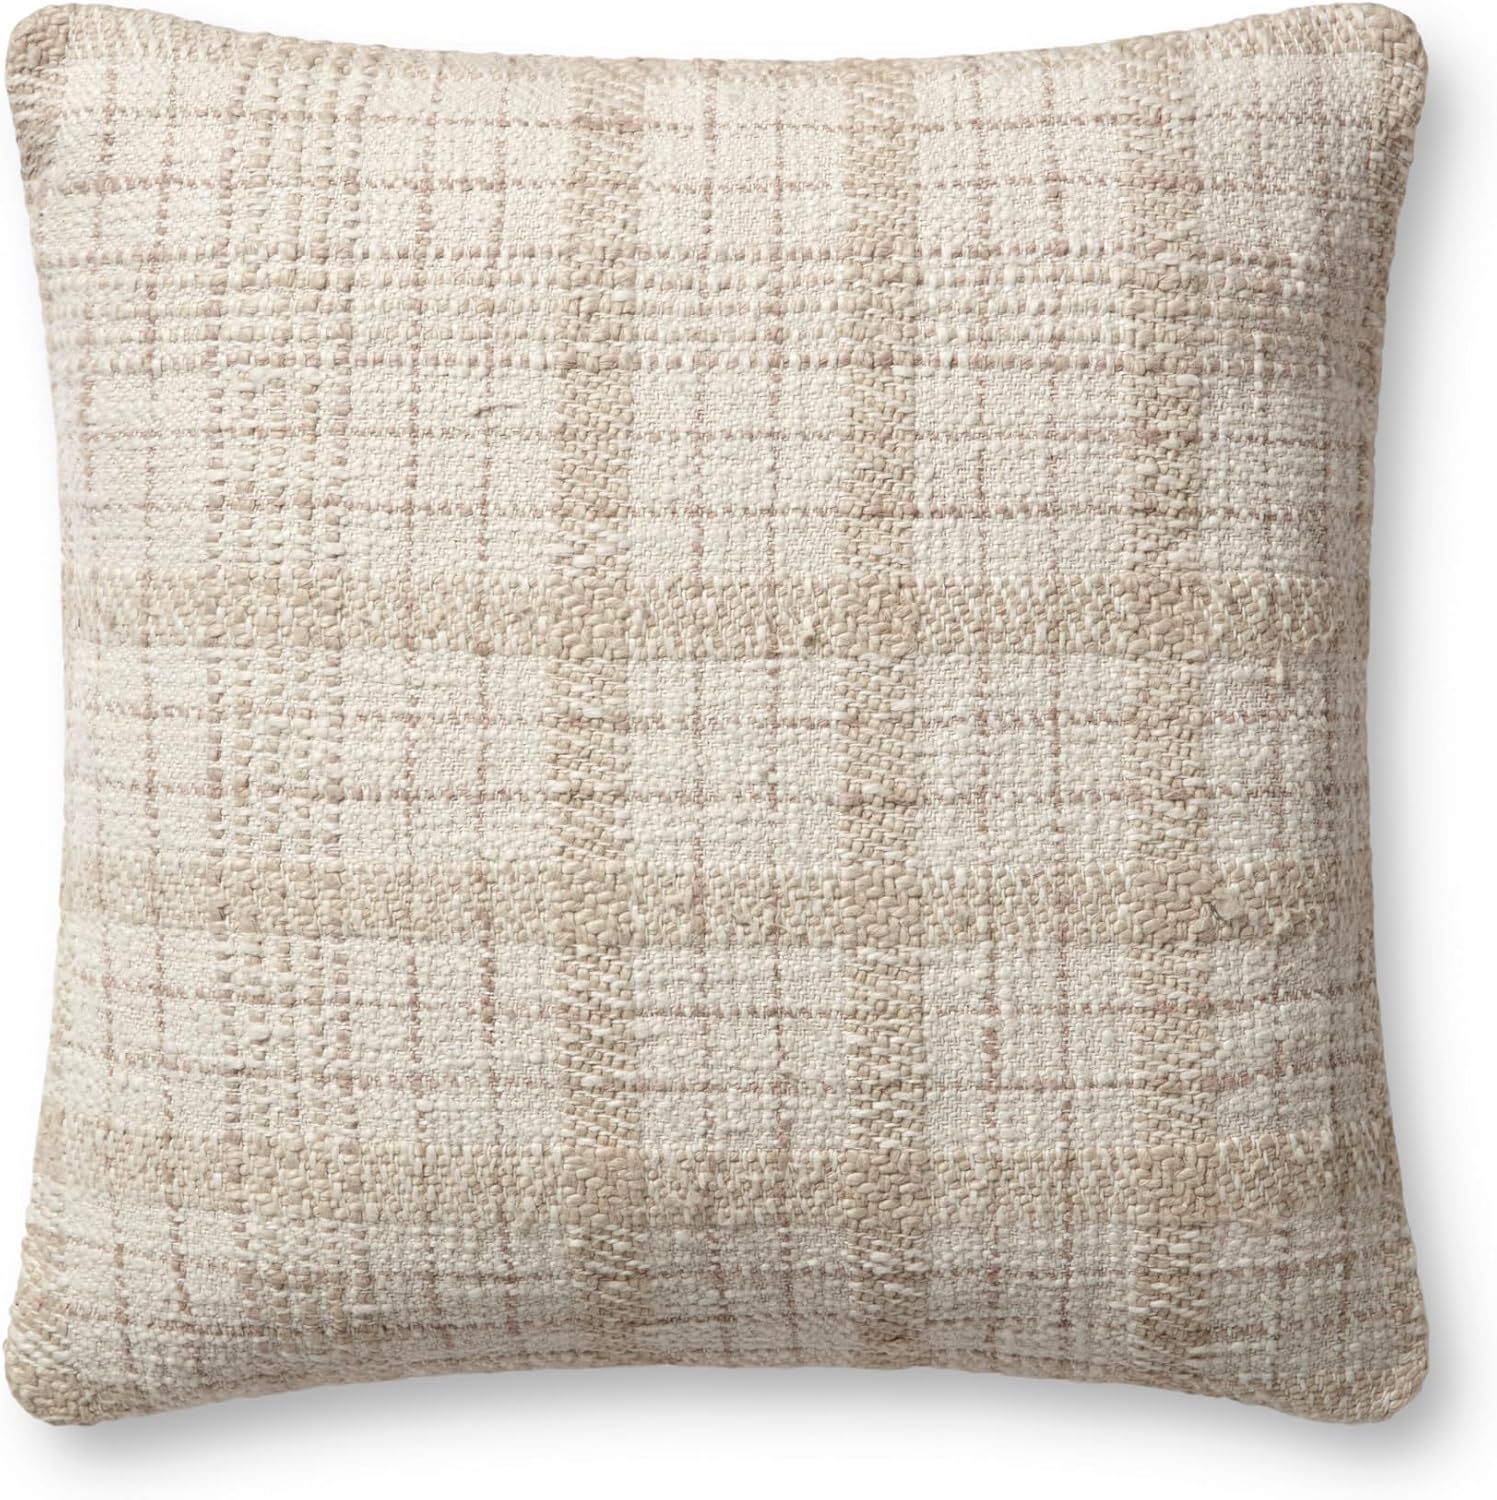 Loloi Fern Pillow, 18x18 Cover Only, Ivory/Beige | Amazon (US)